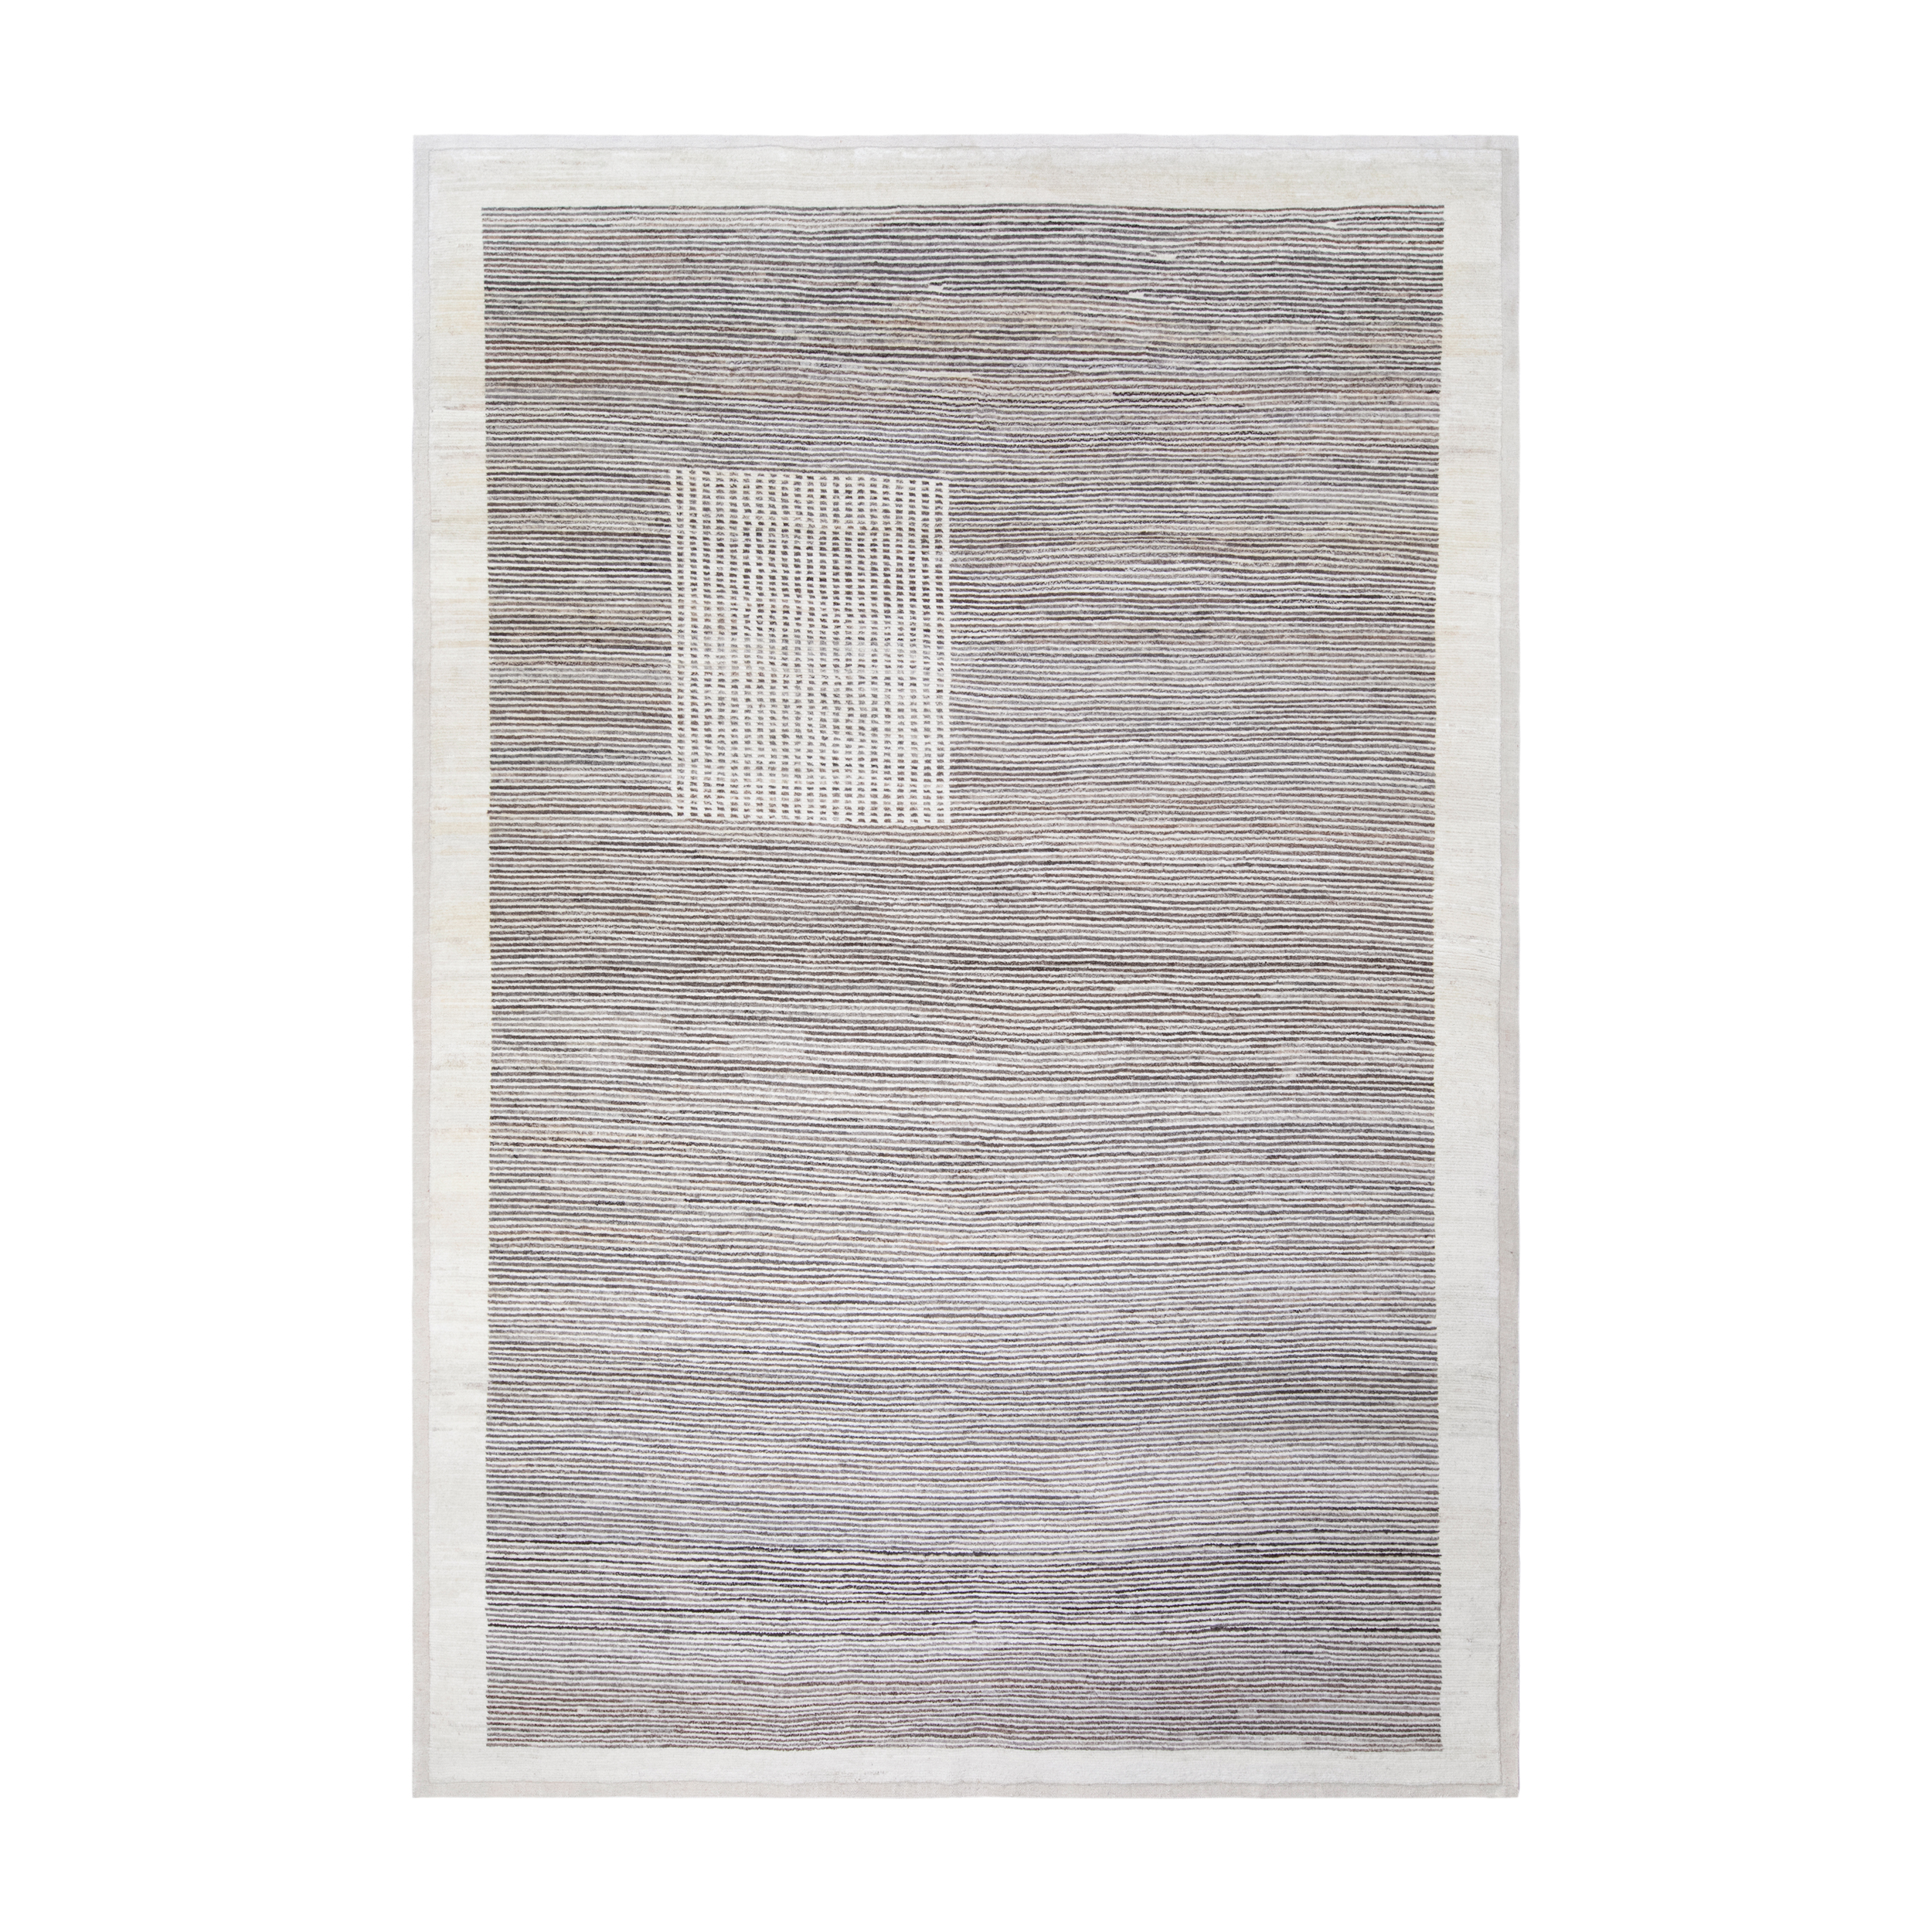 Terrain rug is a hand-knotted modern rug made from un-dyed wool and natural tones. 